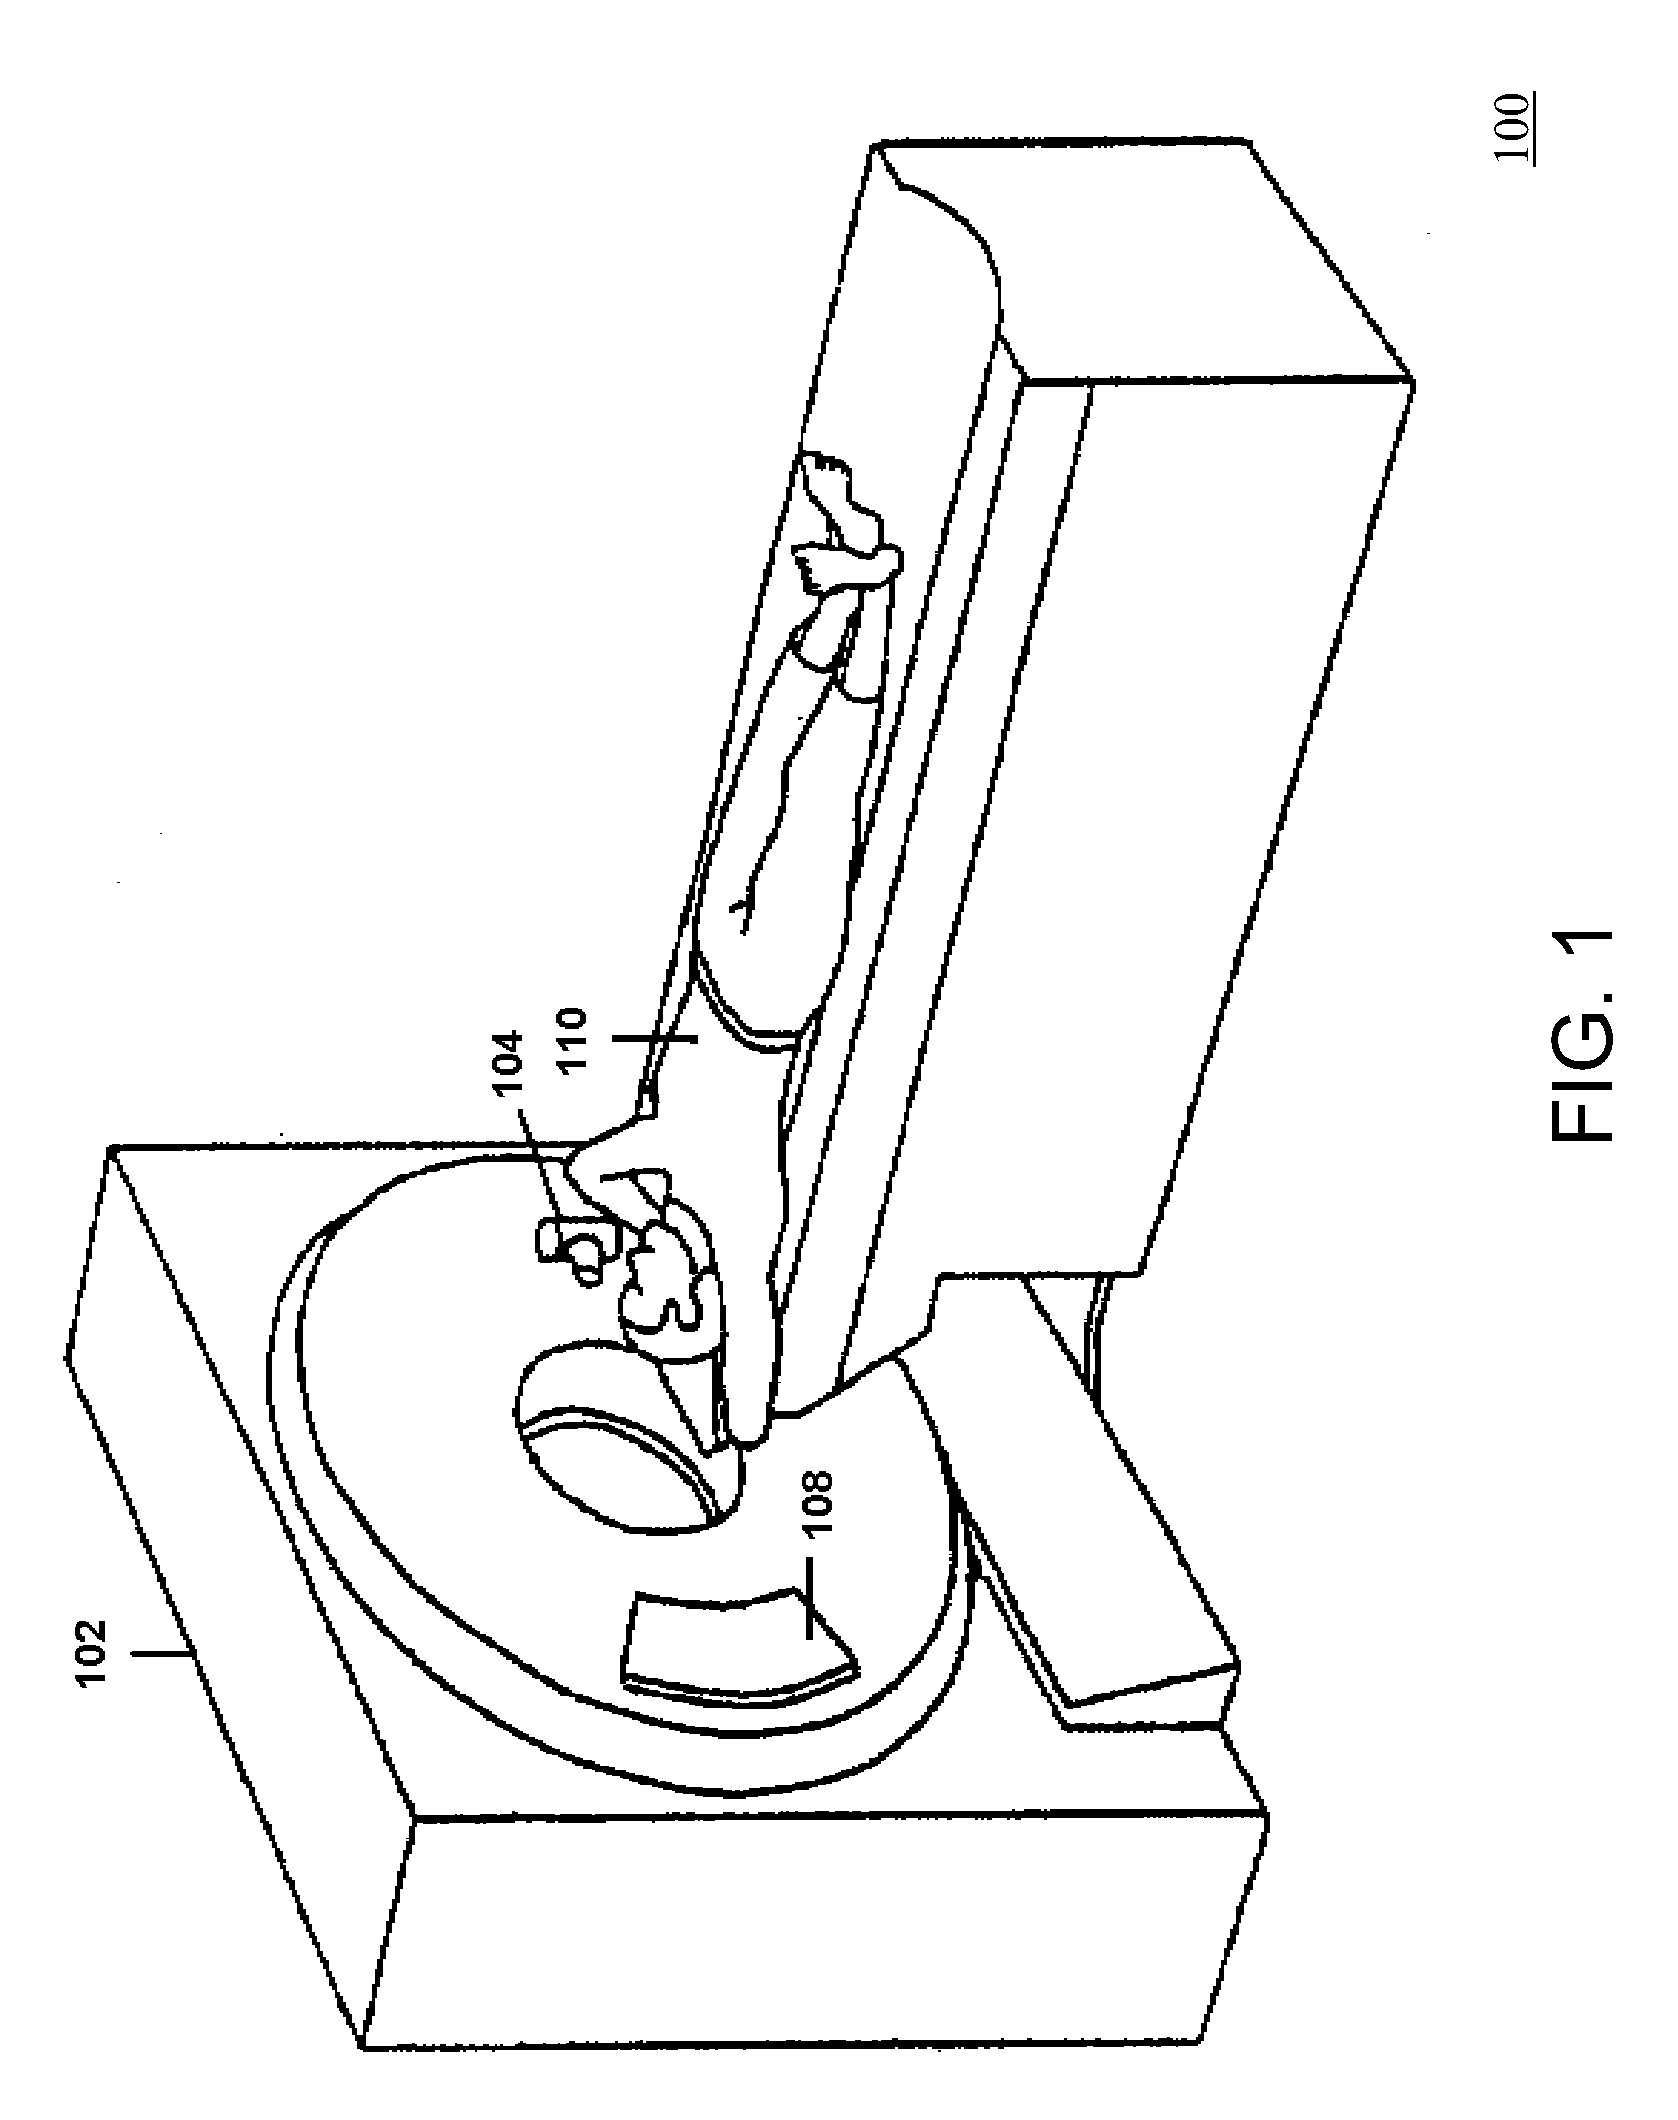 Method for calibrating a dual -spectral computed tomography (CT) system